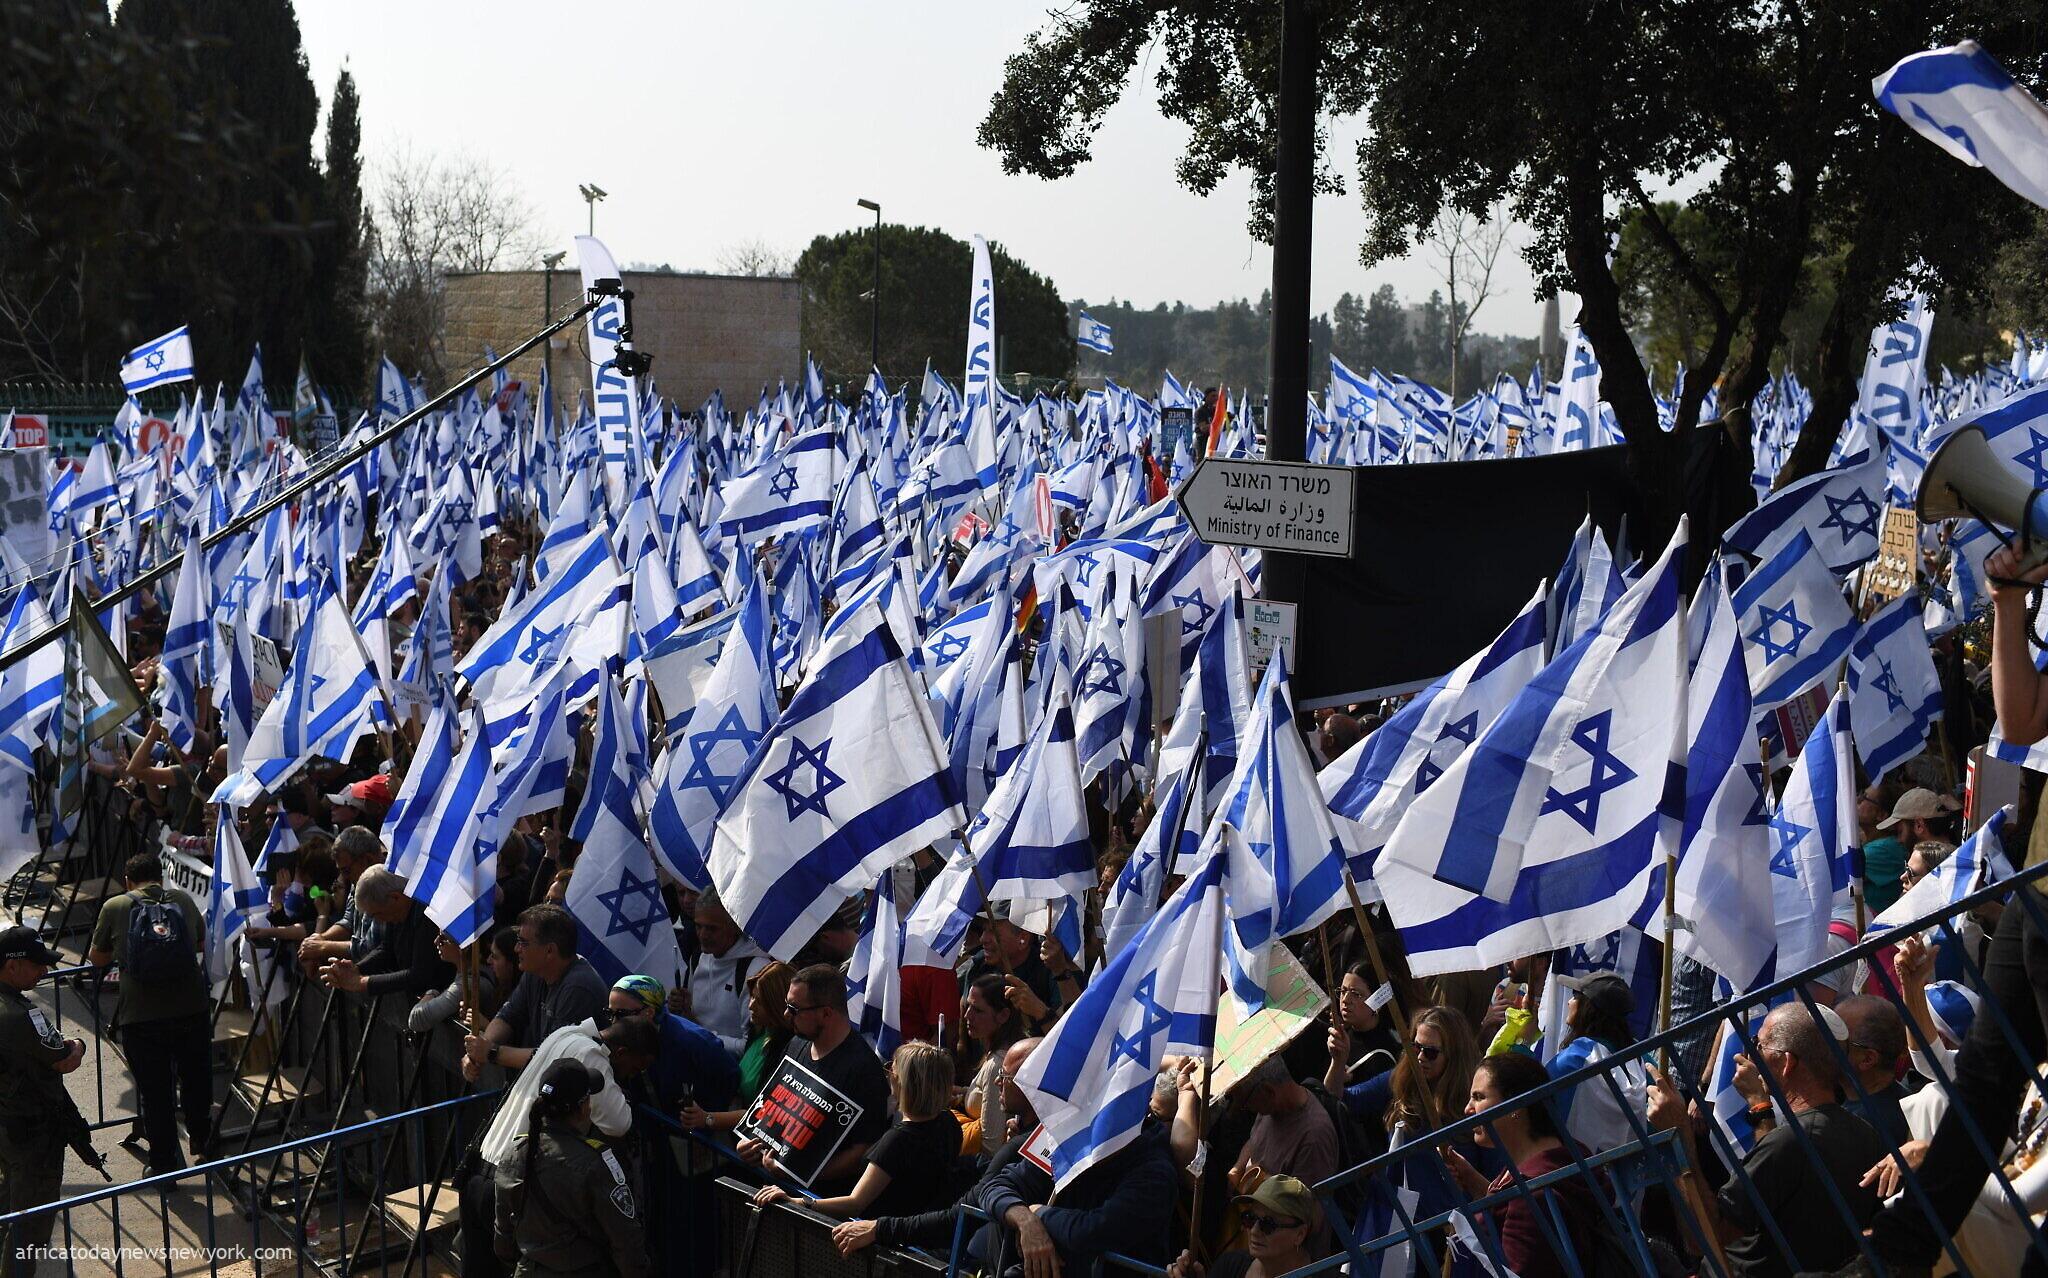 Mossad Never Backed Nationwide Protests, Israel Insists